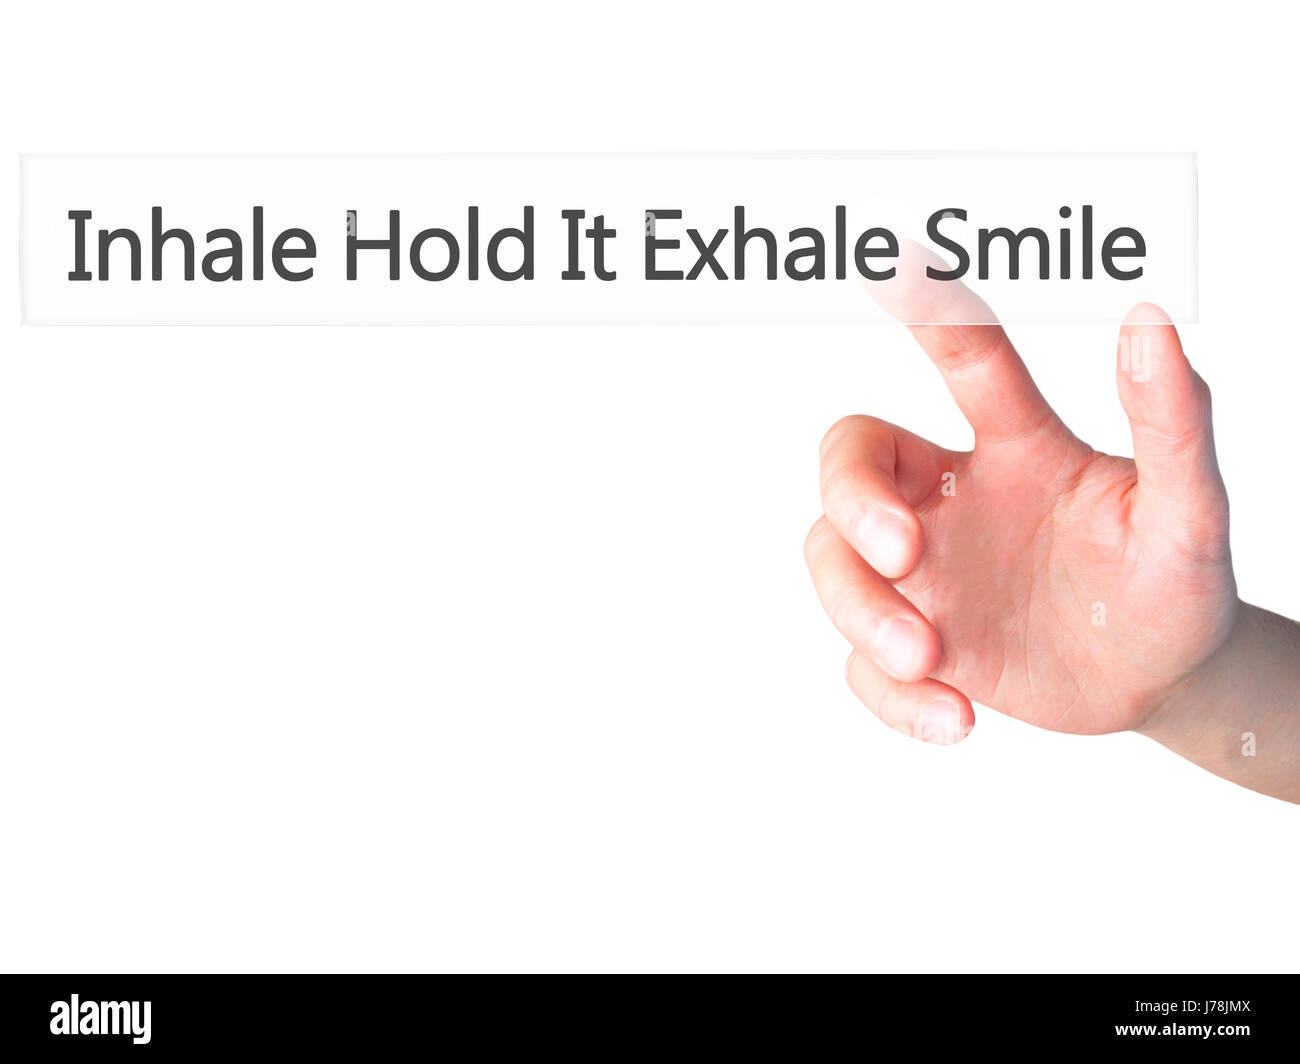 Inhale Hold It Exhale Smile - Hand pressing a button on blurred background concept . Business, technology, internet concept. Stock Photo Stock Photo